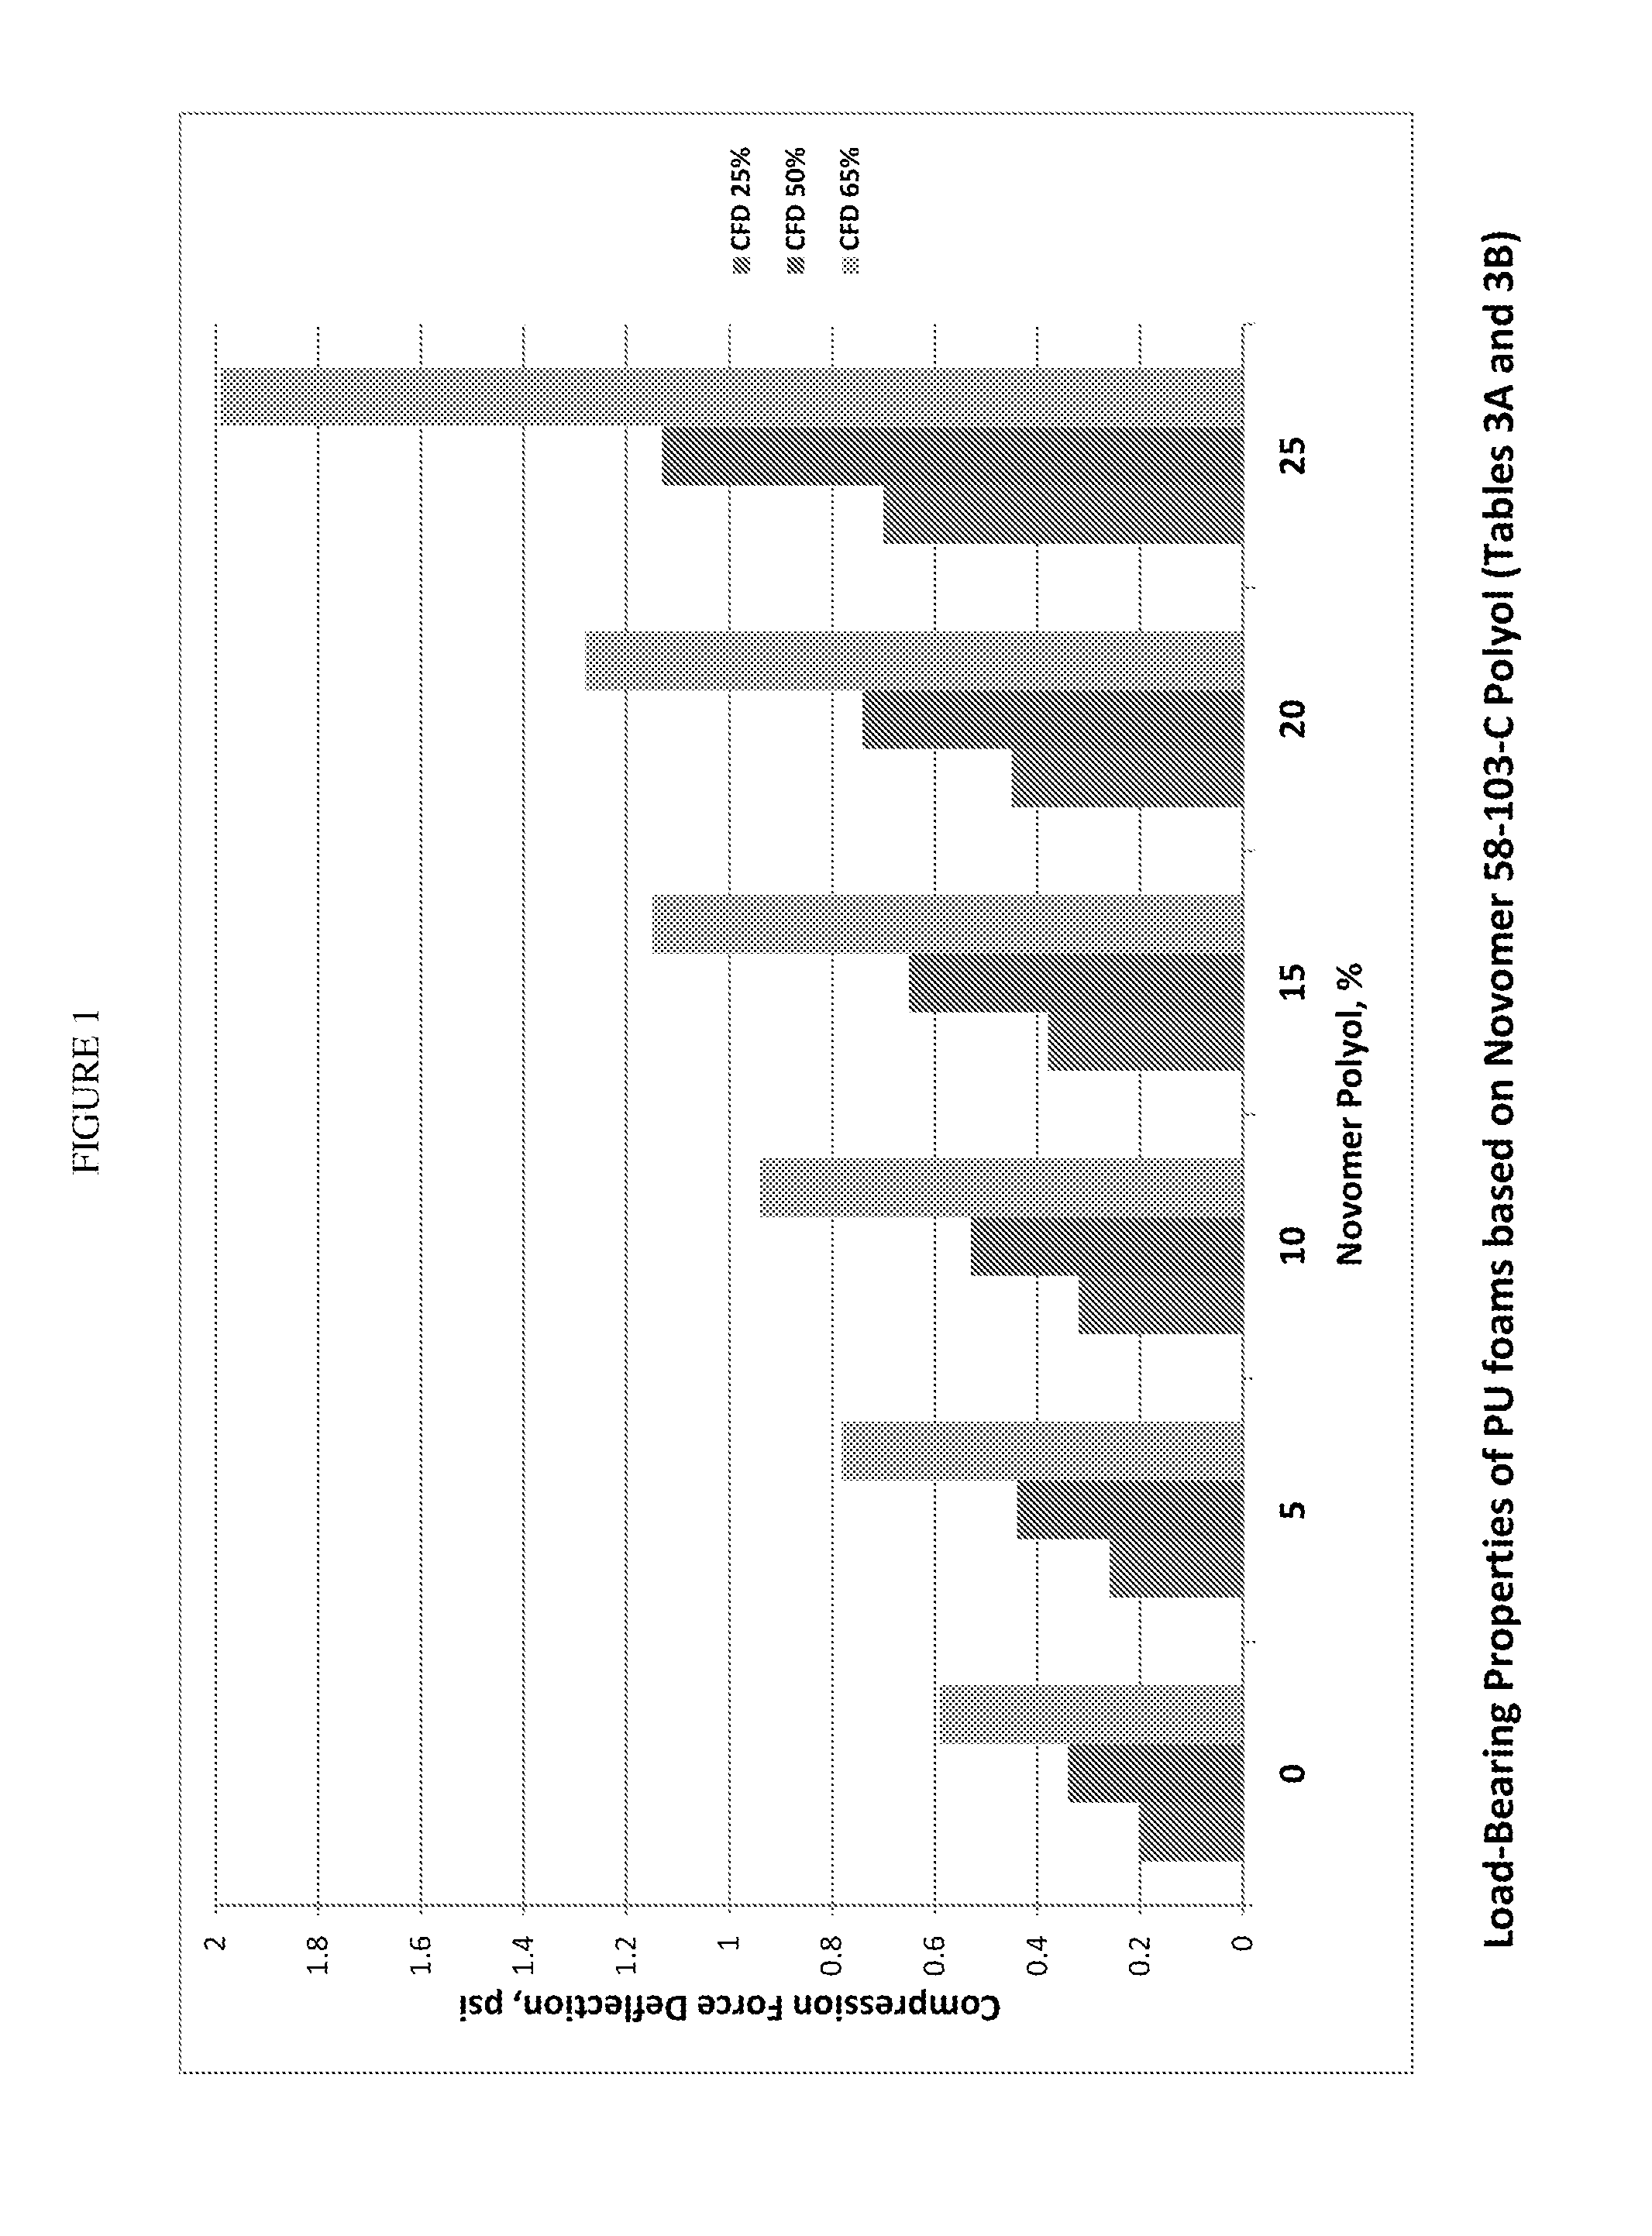 High strength polyurethane foam compositions and methods